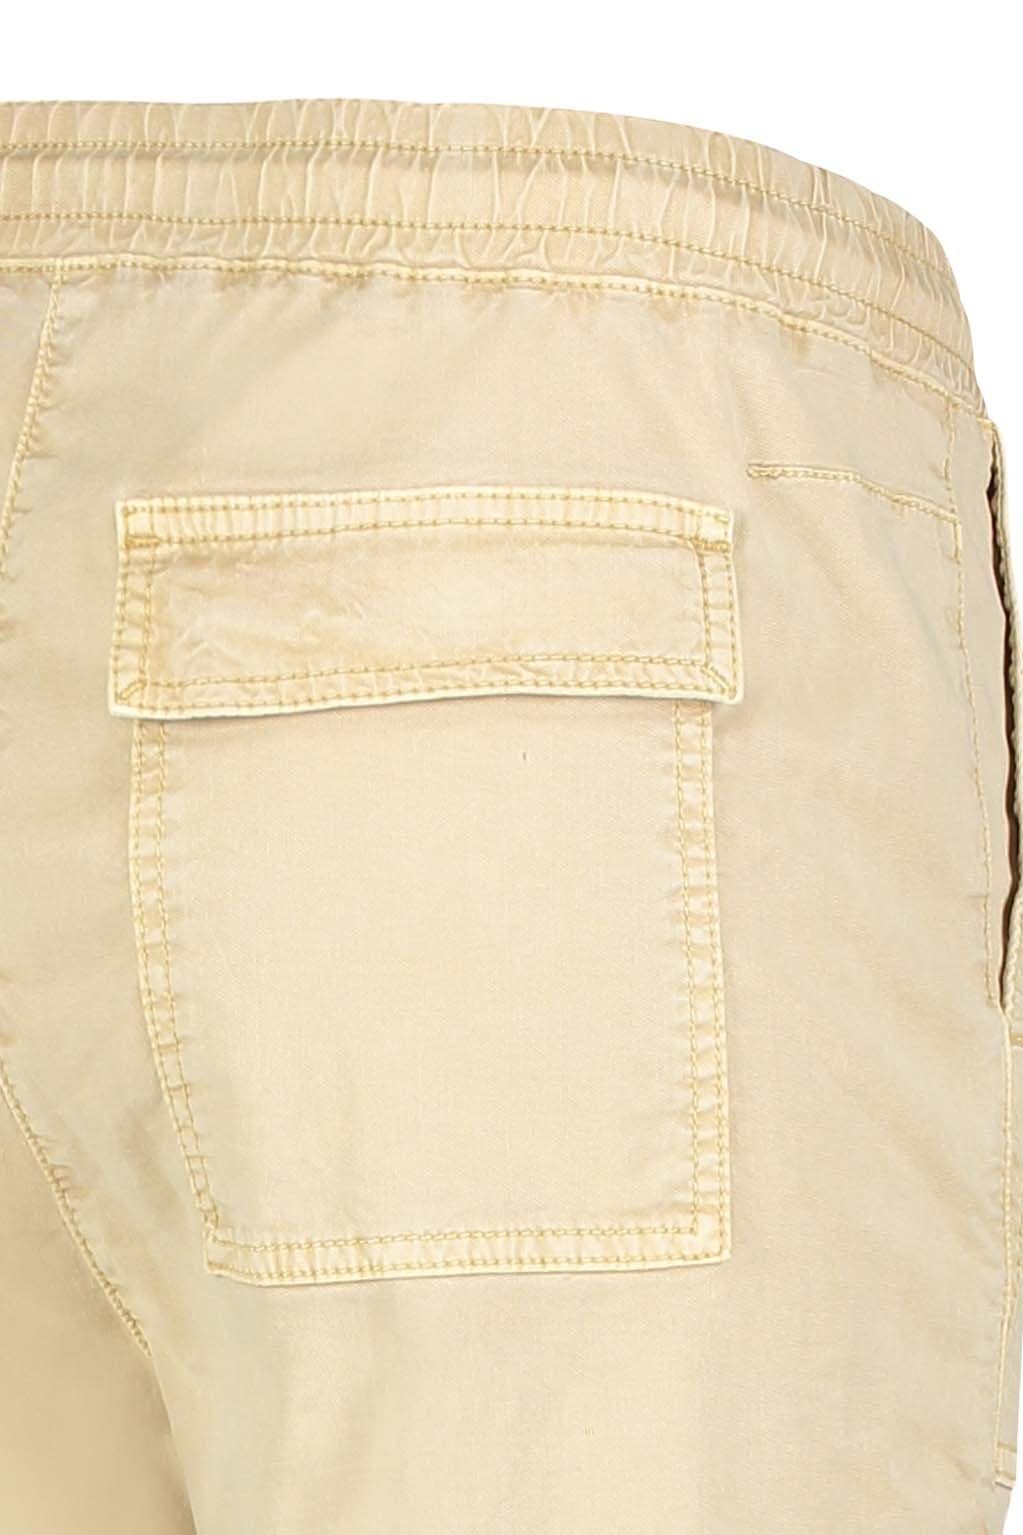 PPT MAC EASY Stretch-Jeans 2774-00-0407 MAC 216R SHORTS biscuit light